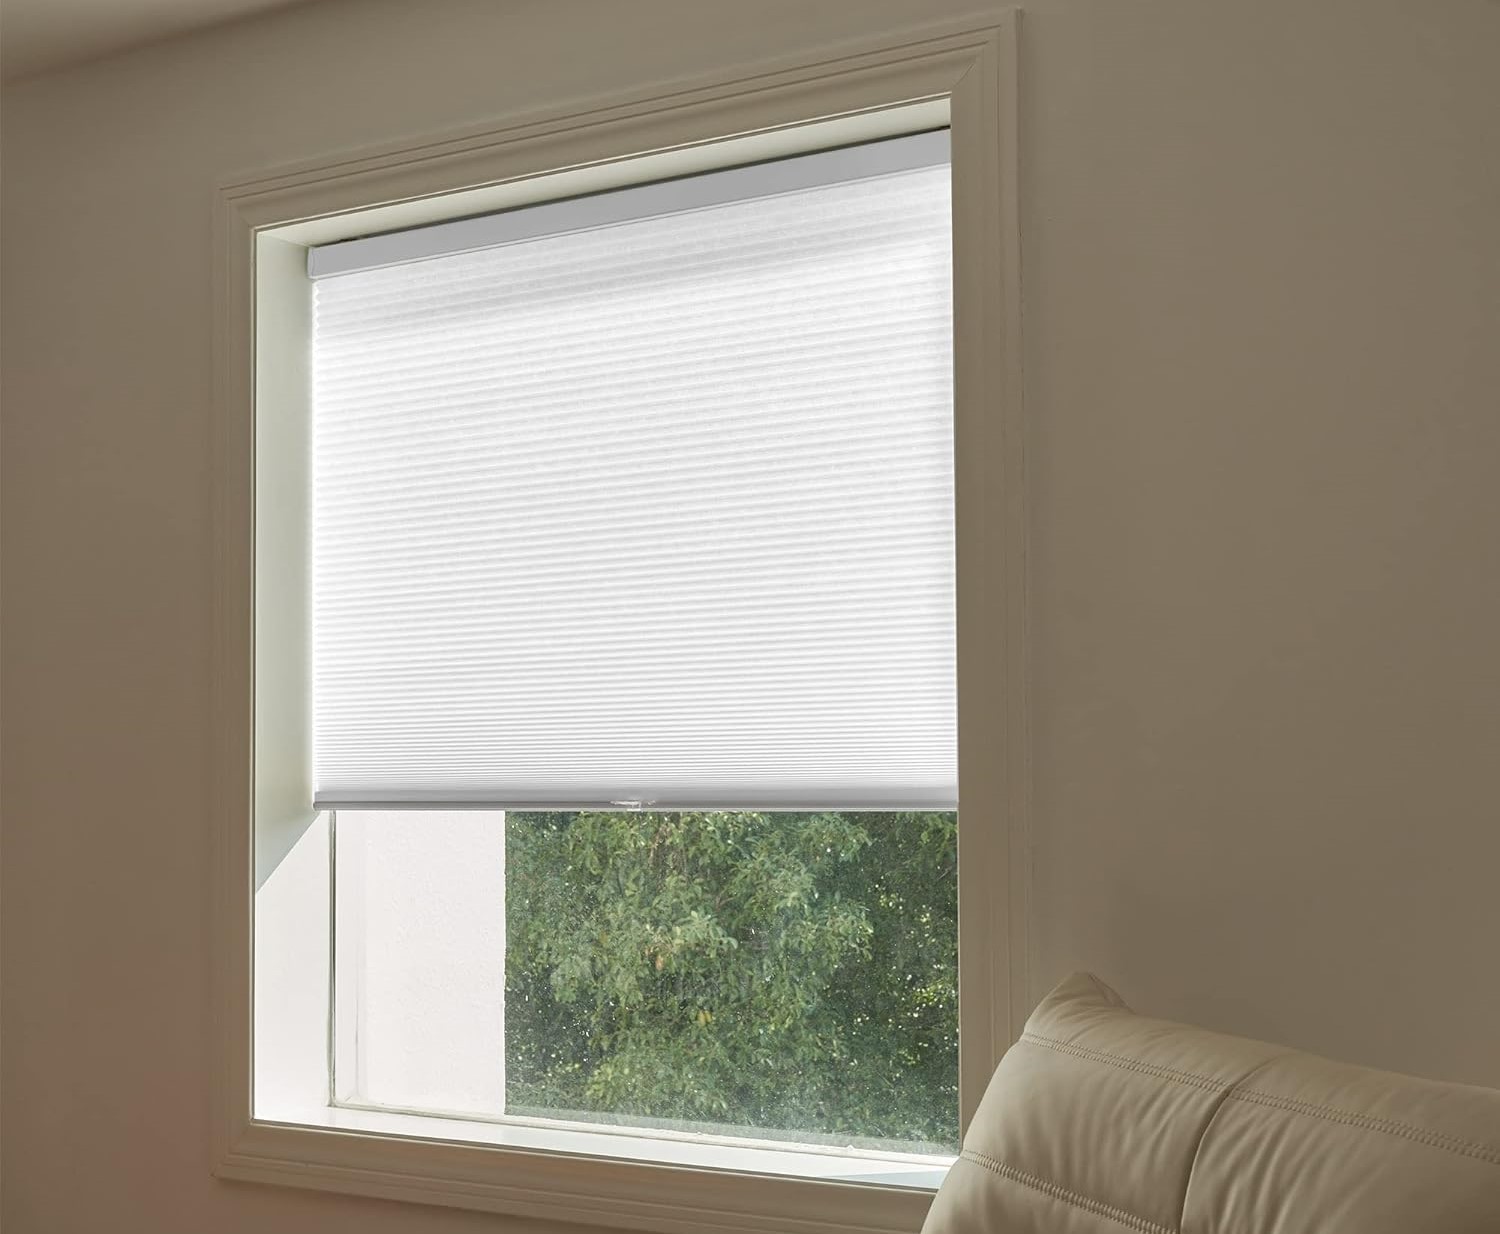 How To Install Honeycomb Blinds Inside Mount